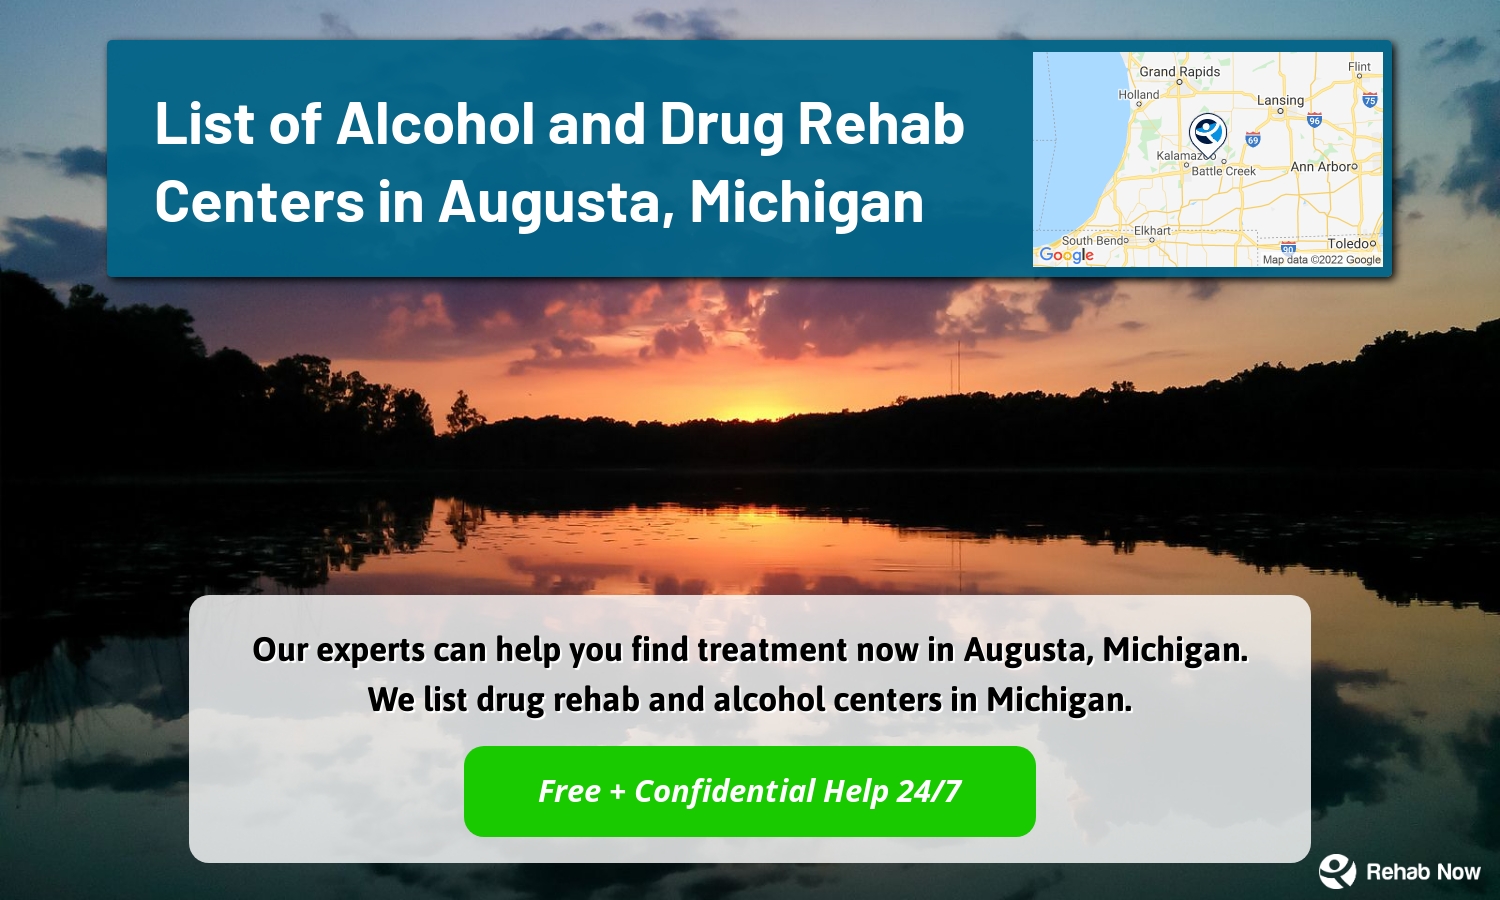 Our experts can help you find treatment now in Augusta, Michigan. We list drug rehab and alcohol centers in Michigan.